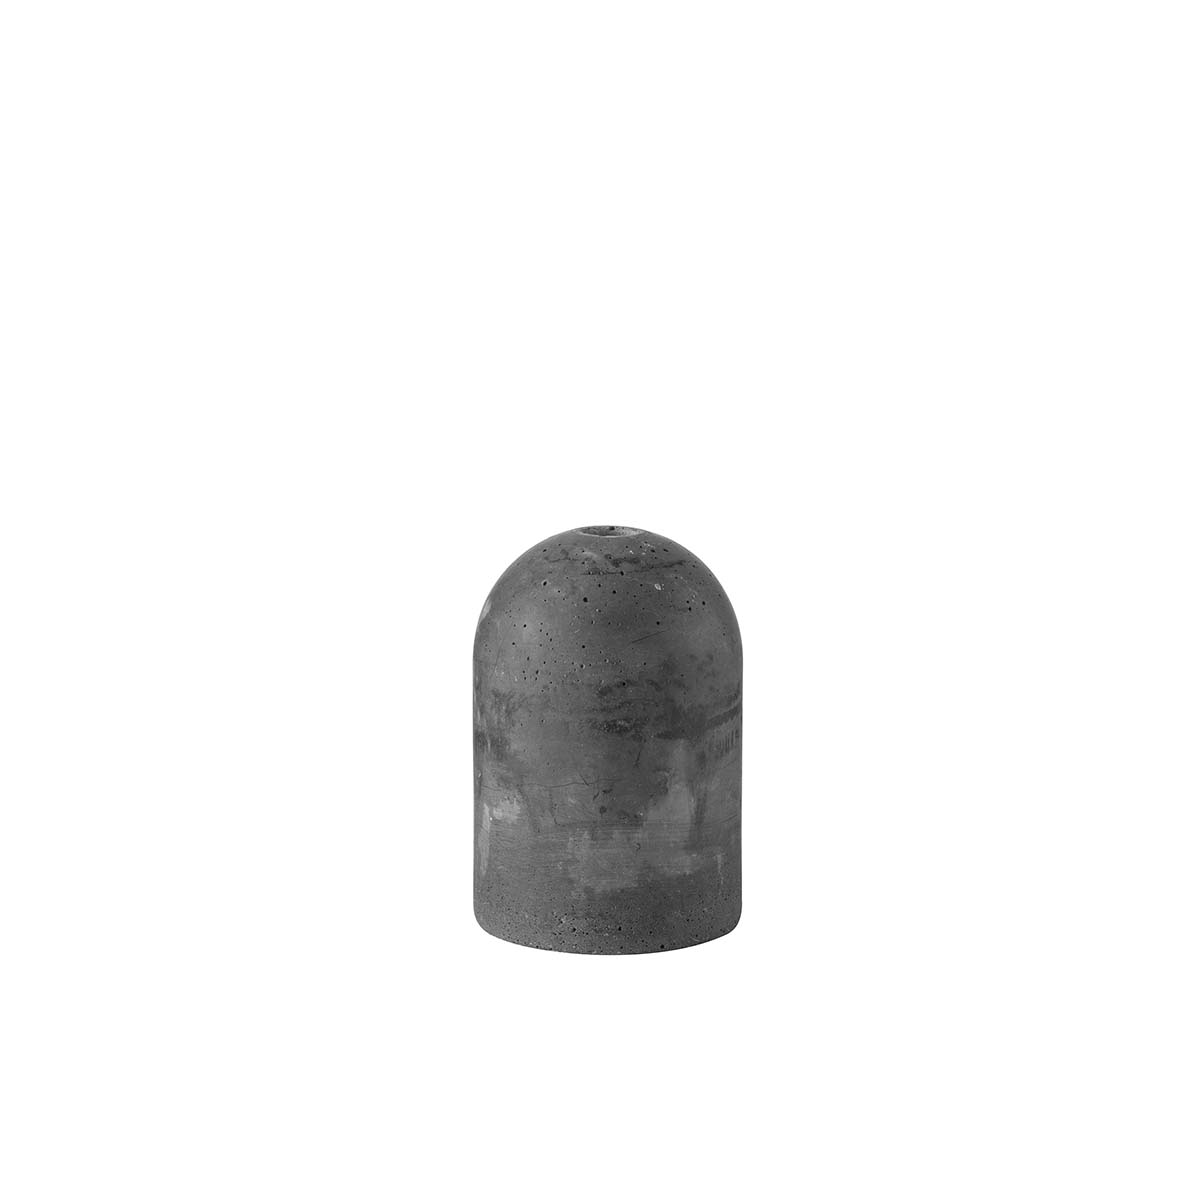 Tangla lighting - TLLH026AR - lamp holder water stone - E27 - dome - anthracite